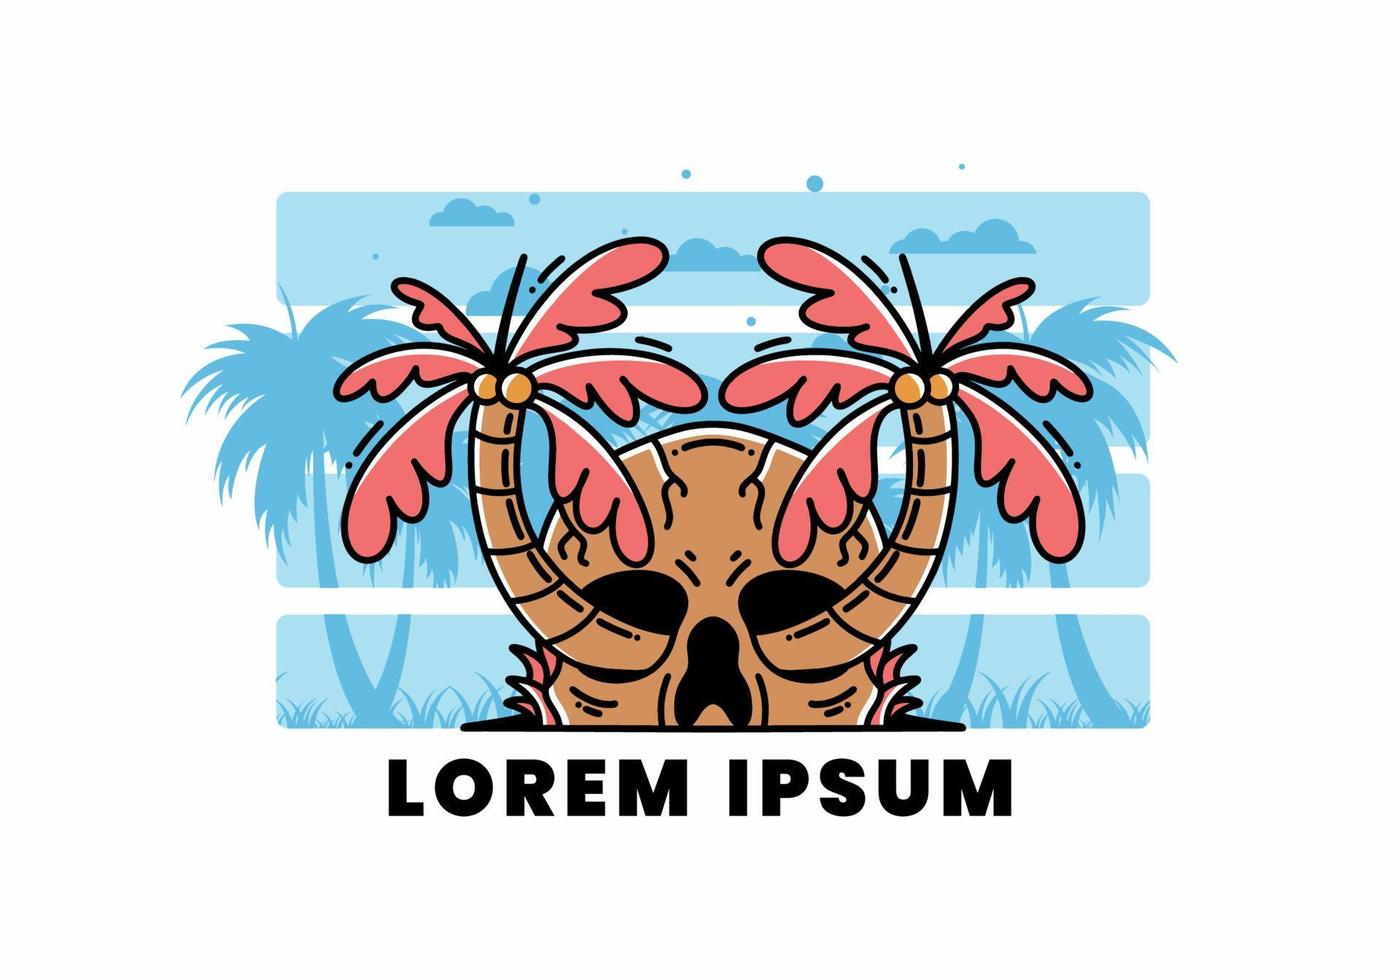 Two coconut trees growing on a skull illustration vector